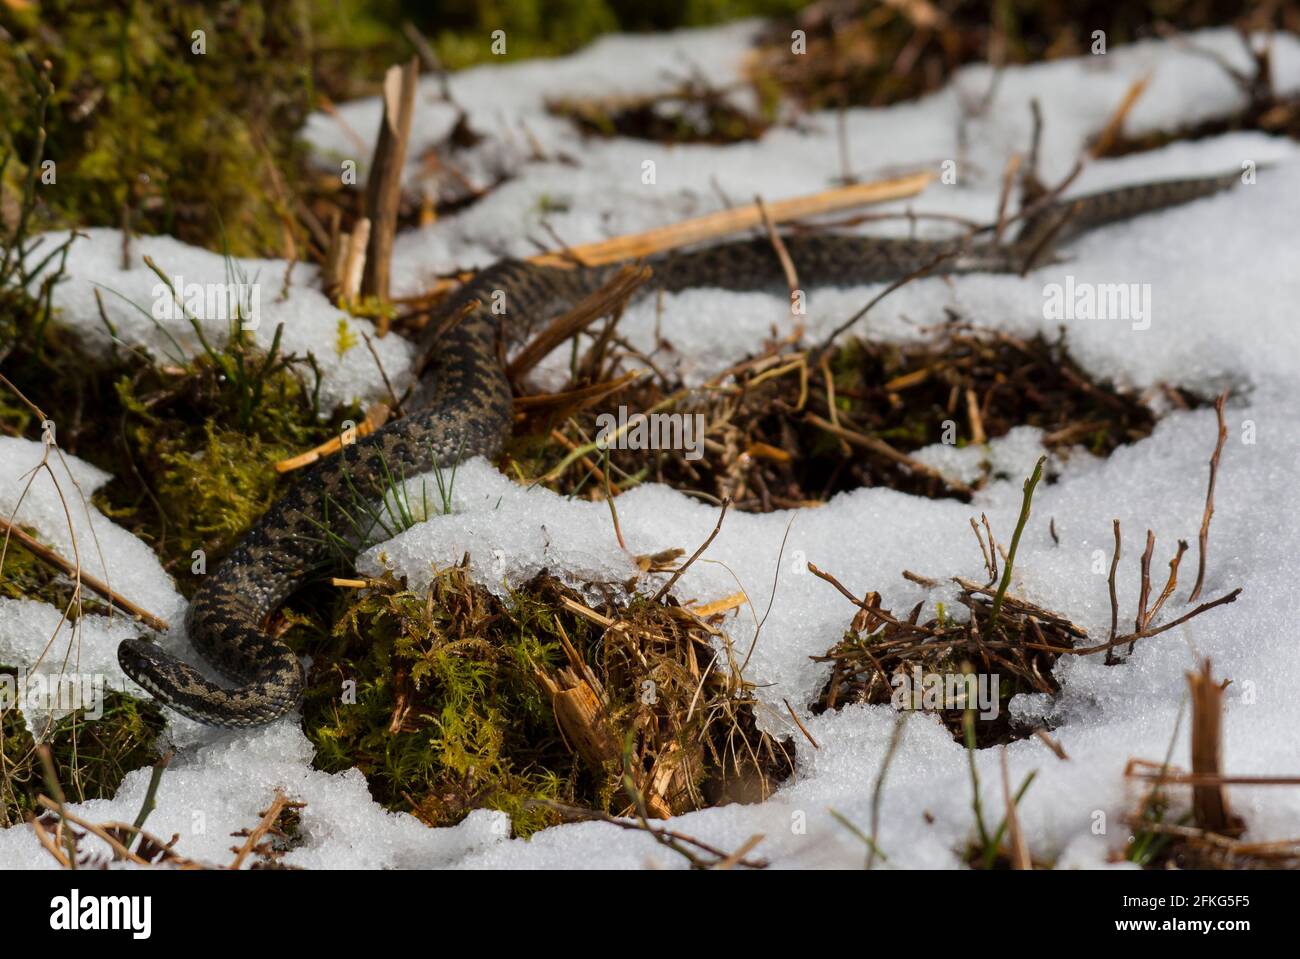 Male Adder (Vipera berus) in the snow, in the Pennine hills, England. Stock Photo